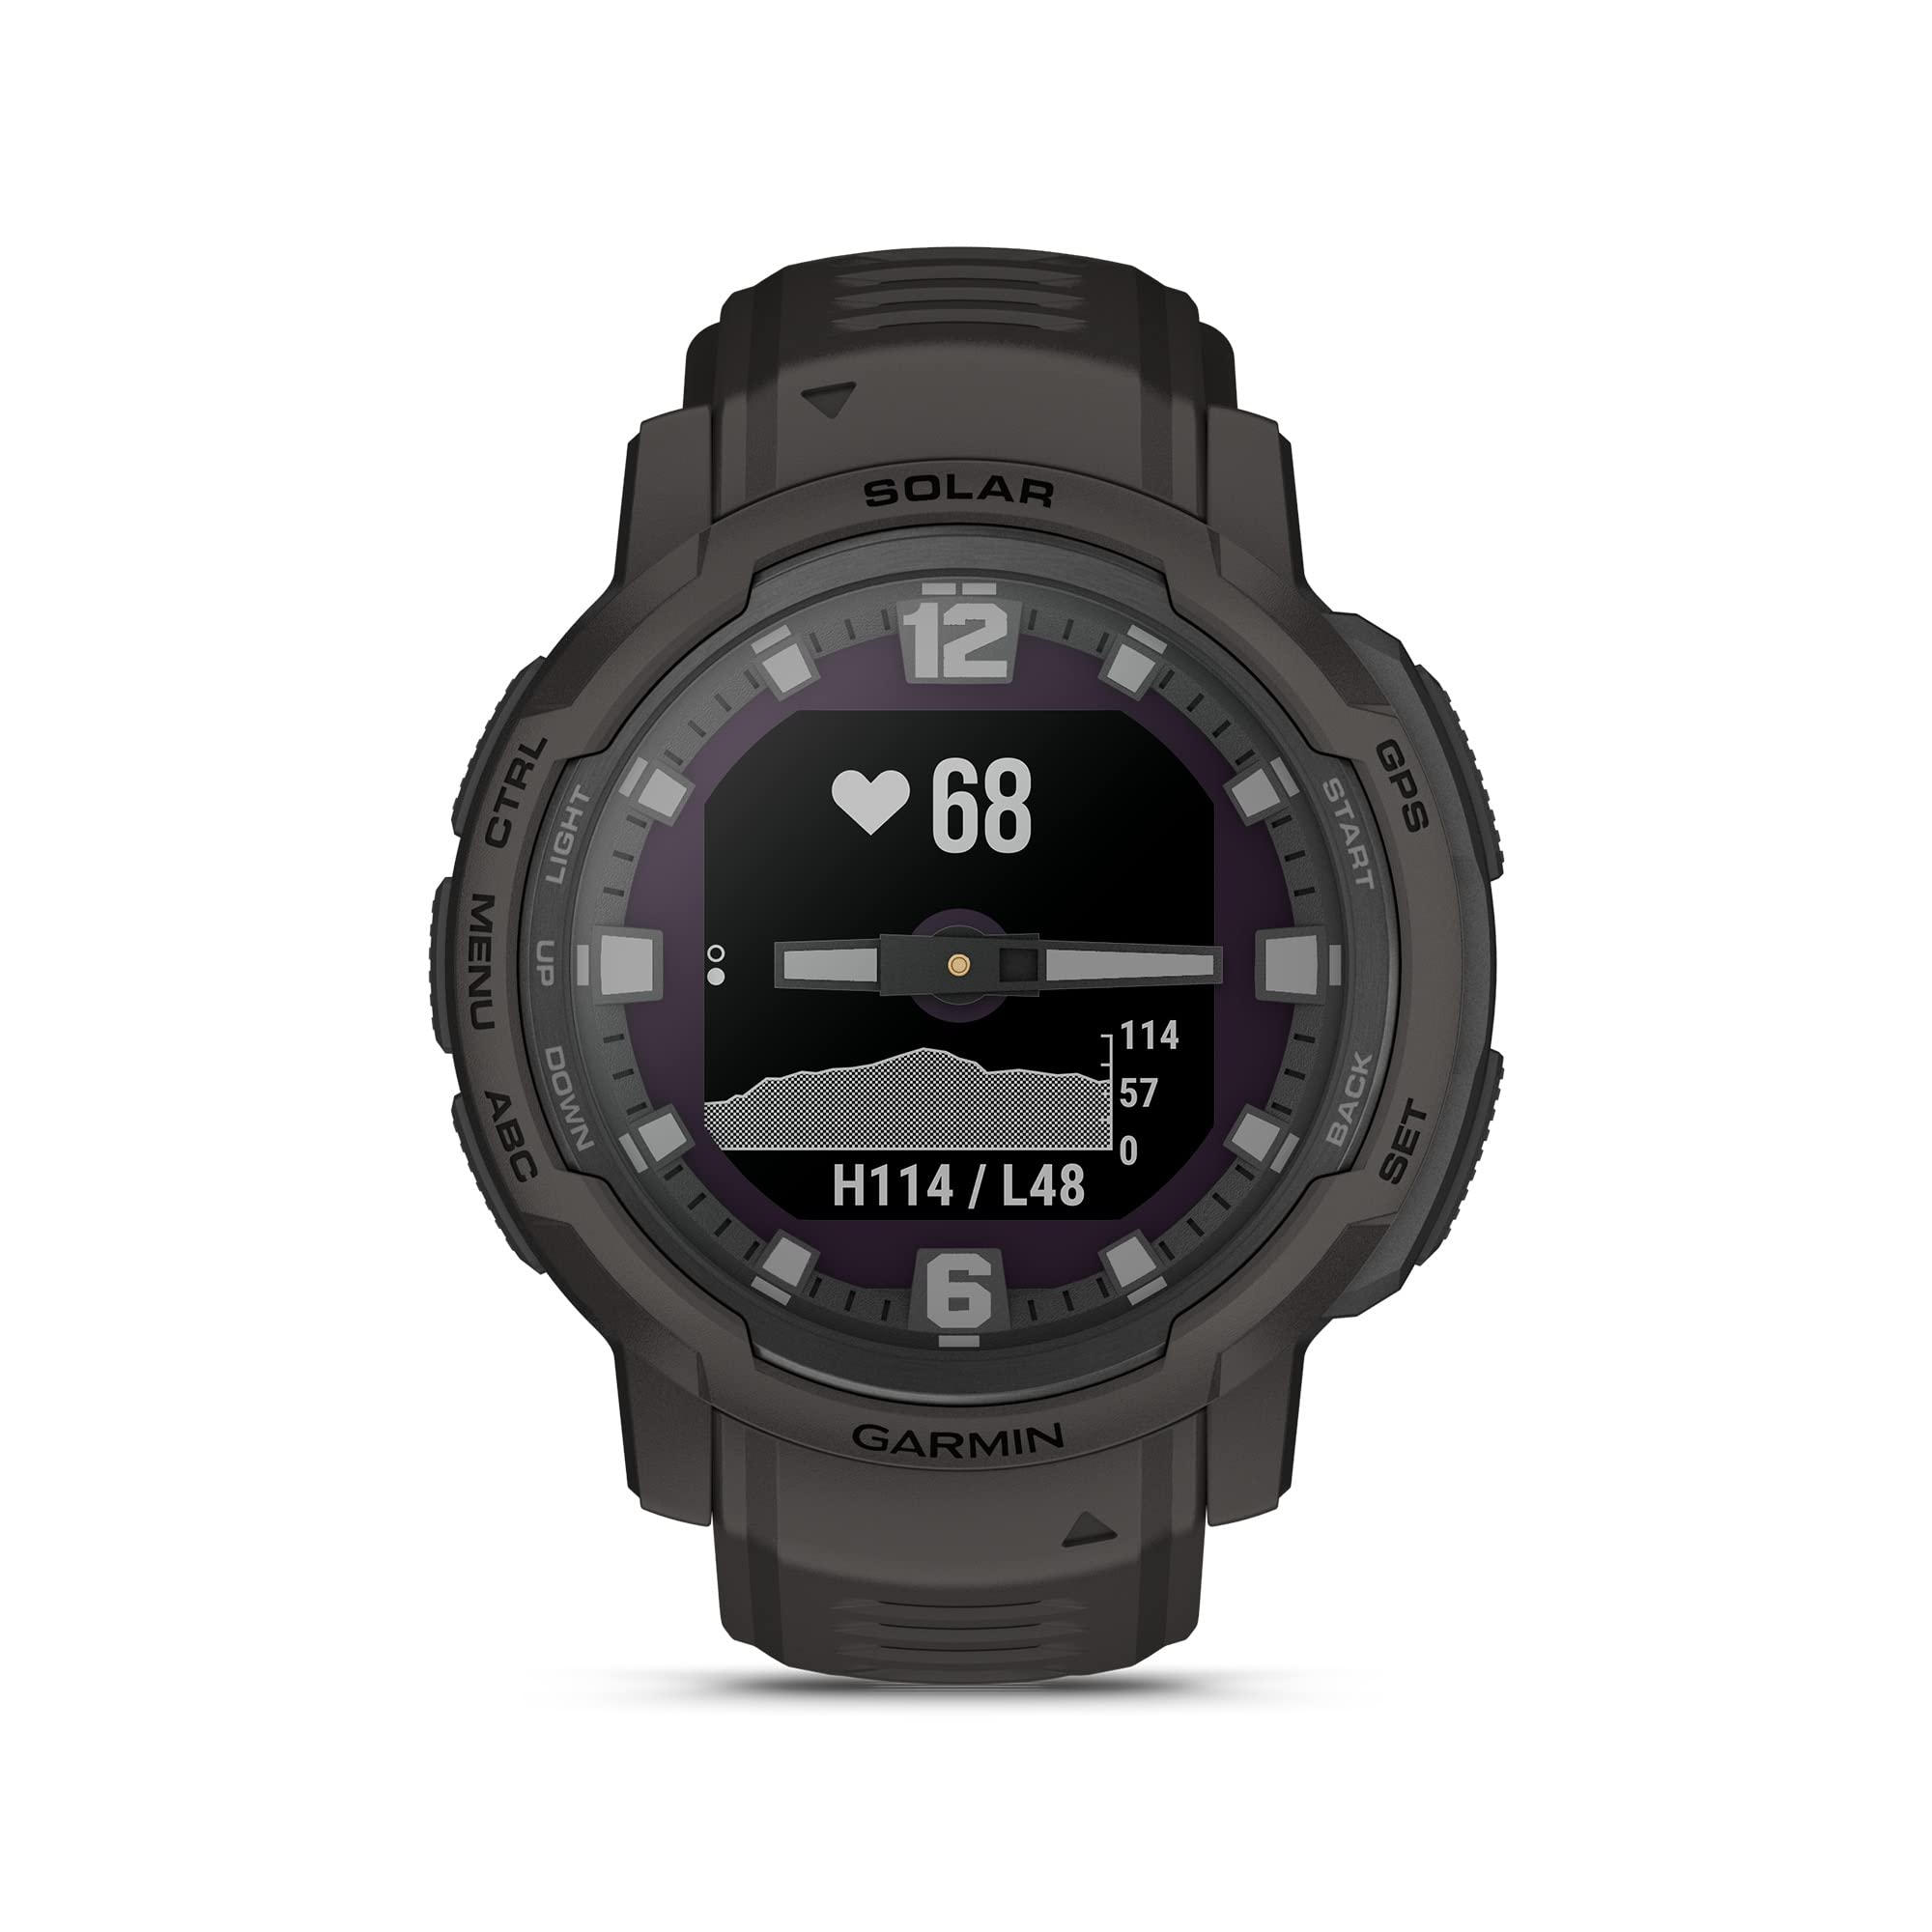 Garmin Instinct Crossover Solar, Rugged Hybrid Smartwatch with Solar Charging Capabilities, Analog Hands and Digital Display, Graphite